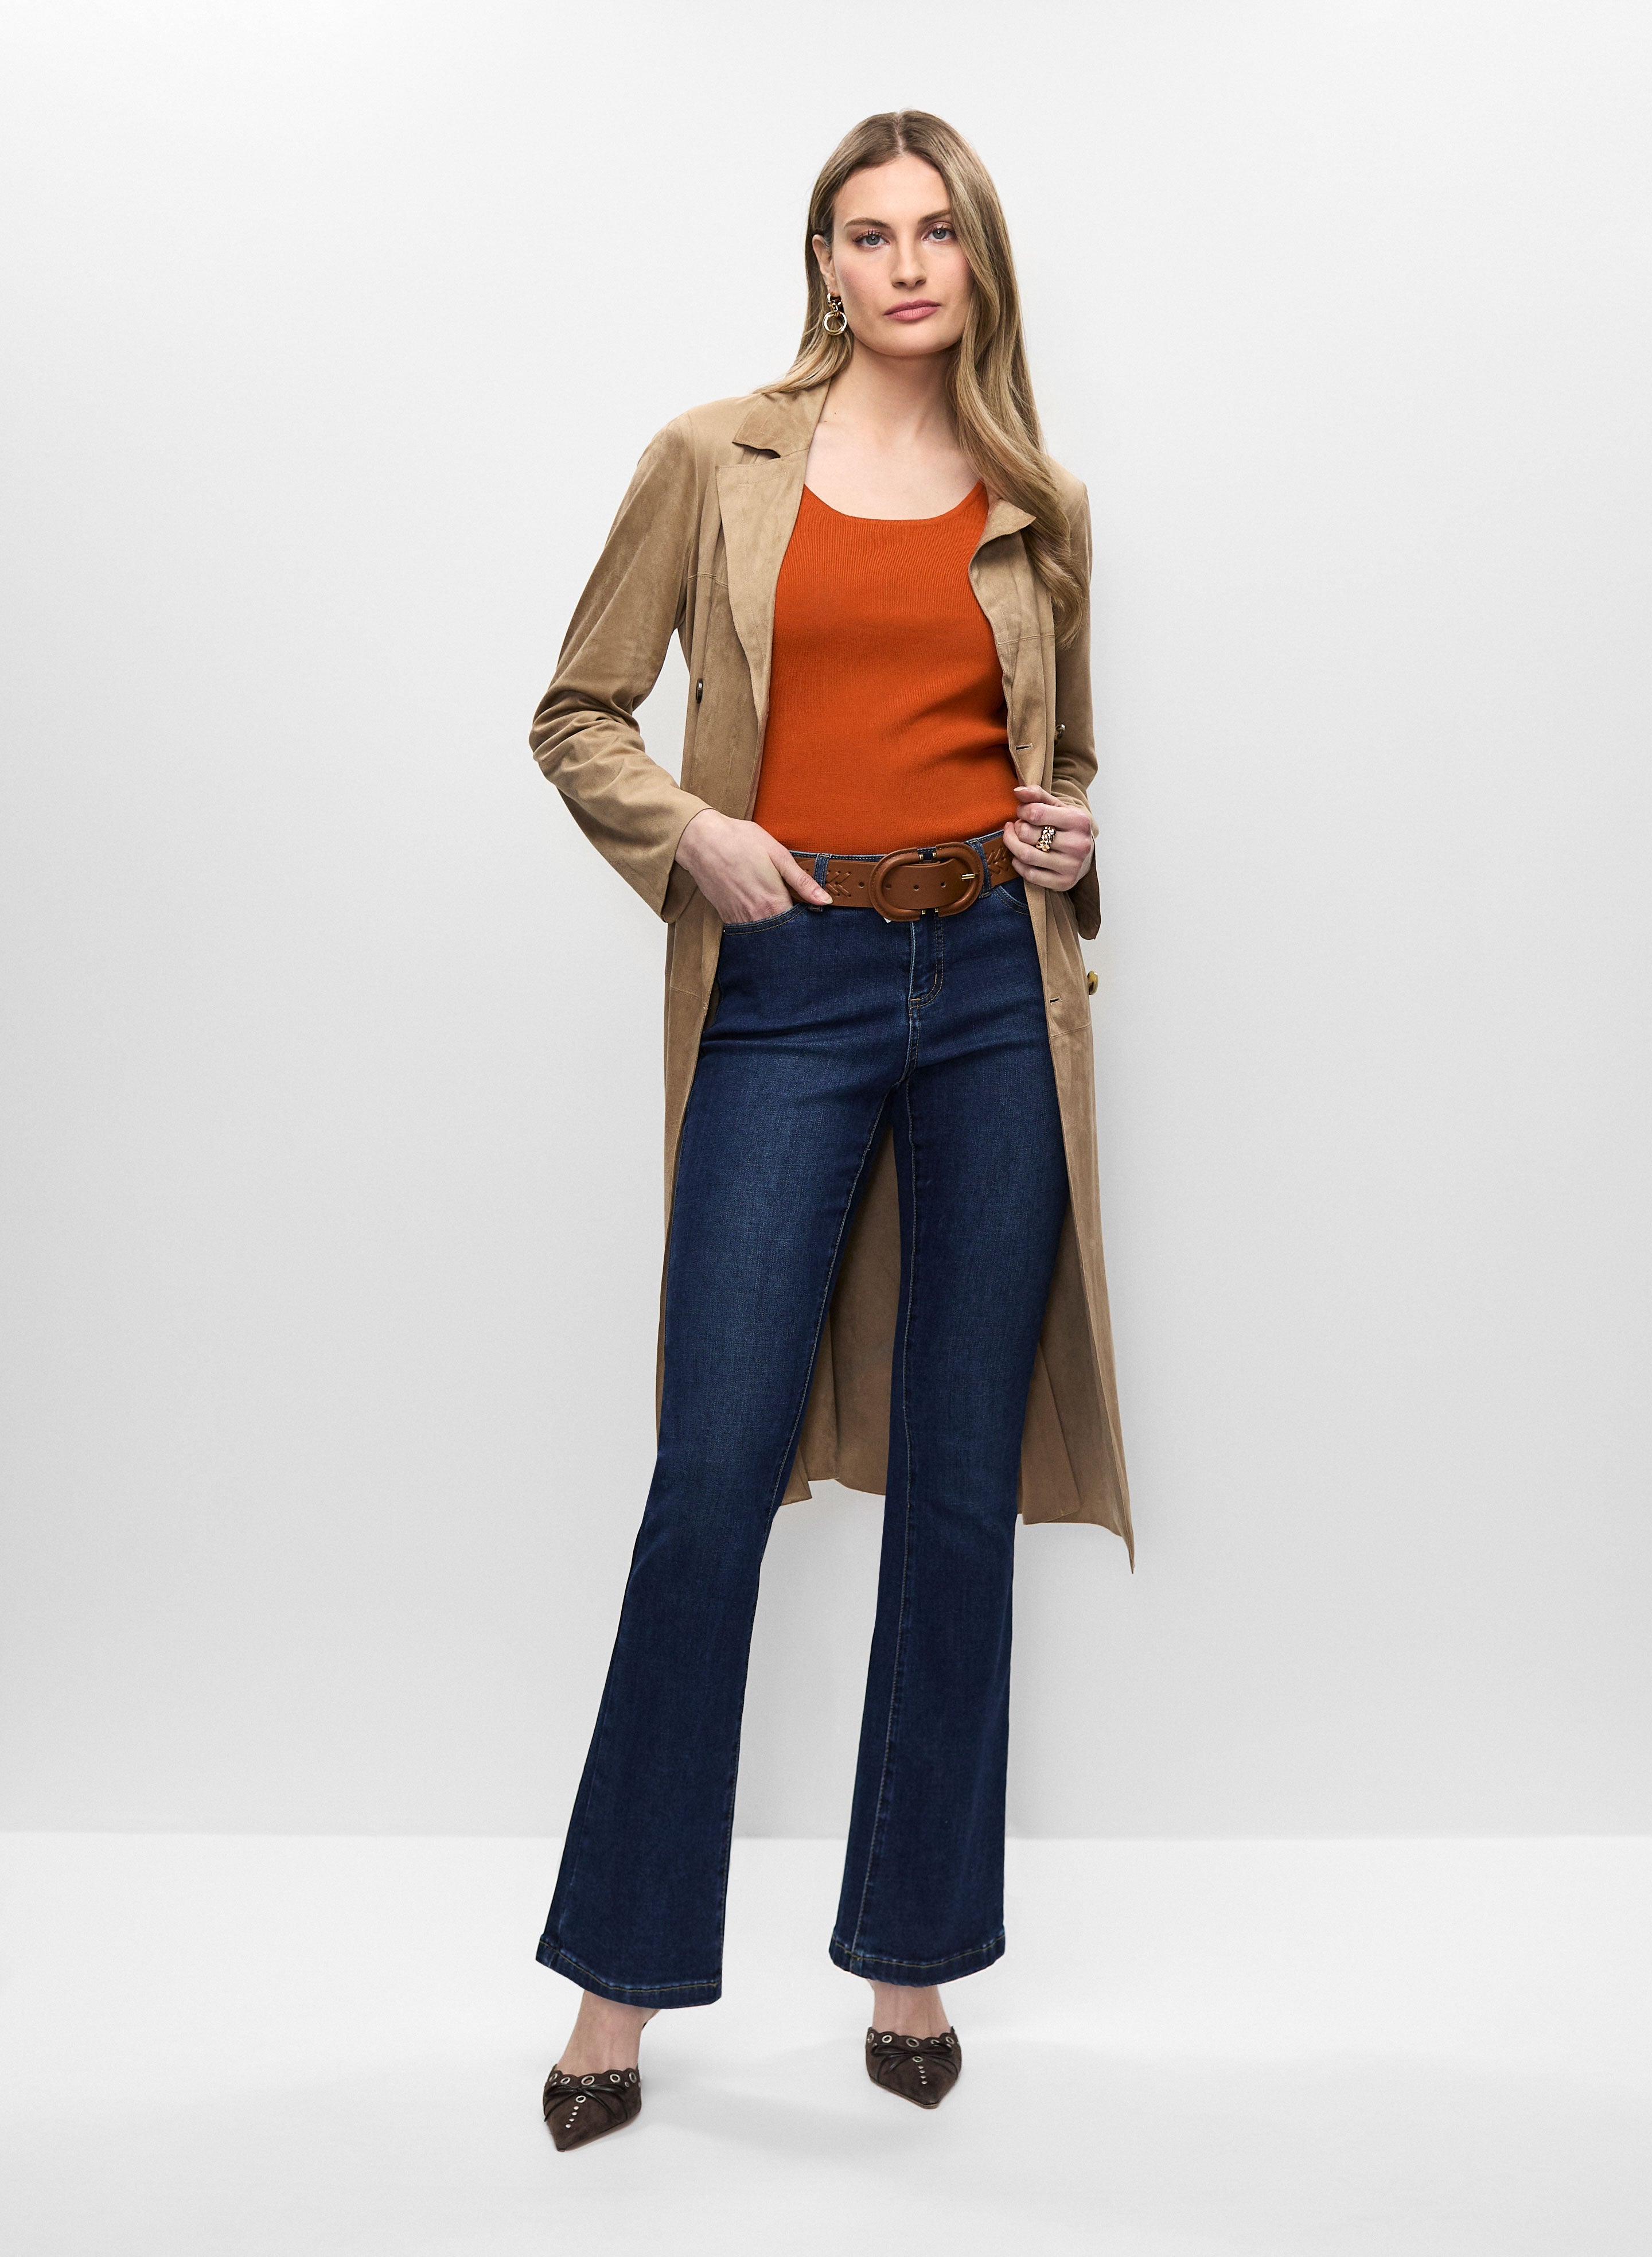 Faux Suede Trench & Flare Leg Jeans